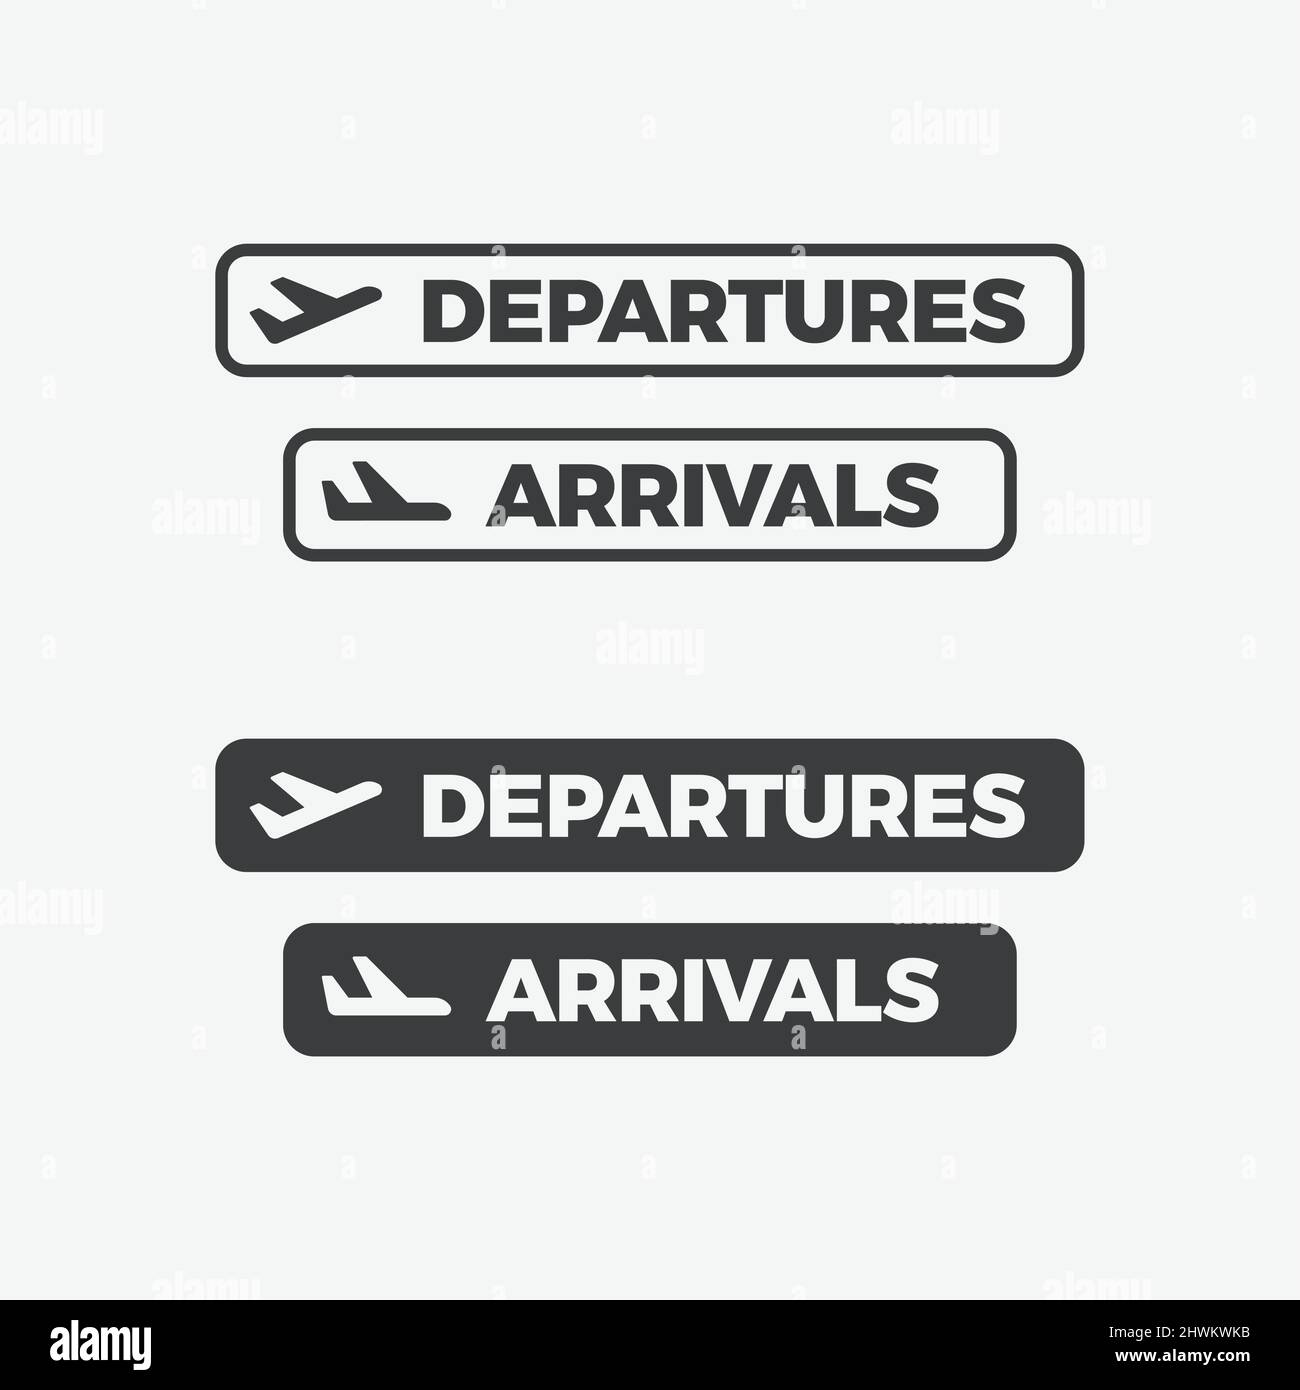 Departures and Arrivals Flat Design Icon Stock Vector